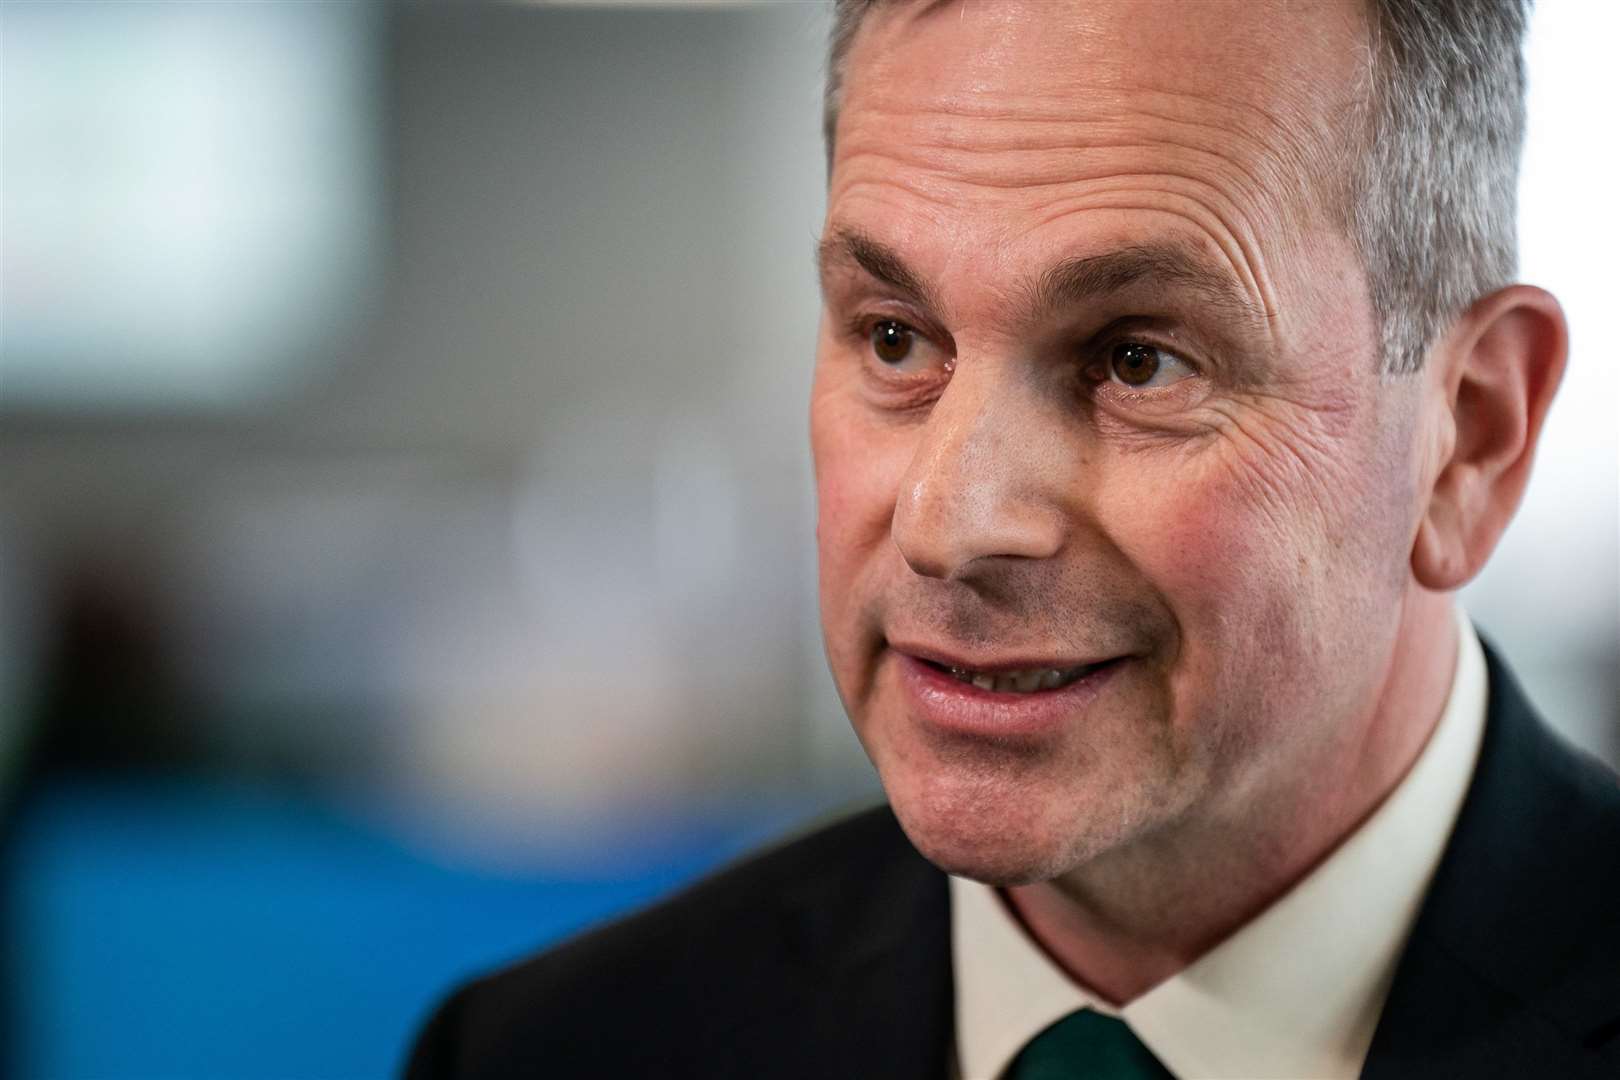 Daniel Elkeles, chief executive of the London Ambulance Service, speaks to the media ahead of Wednesday’s strike action by ambulance workers (Aaron Chown/PA)